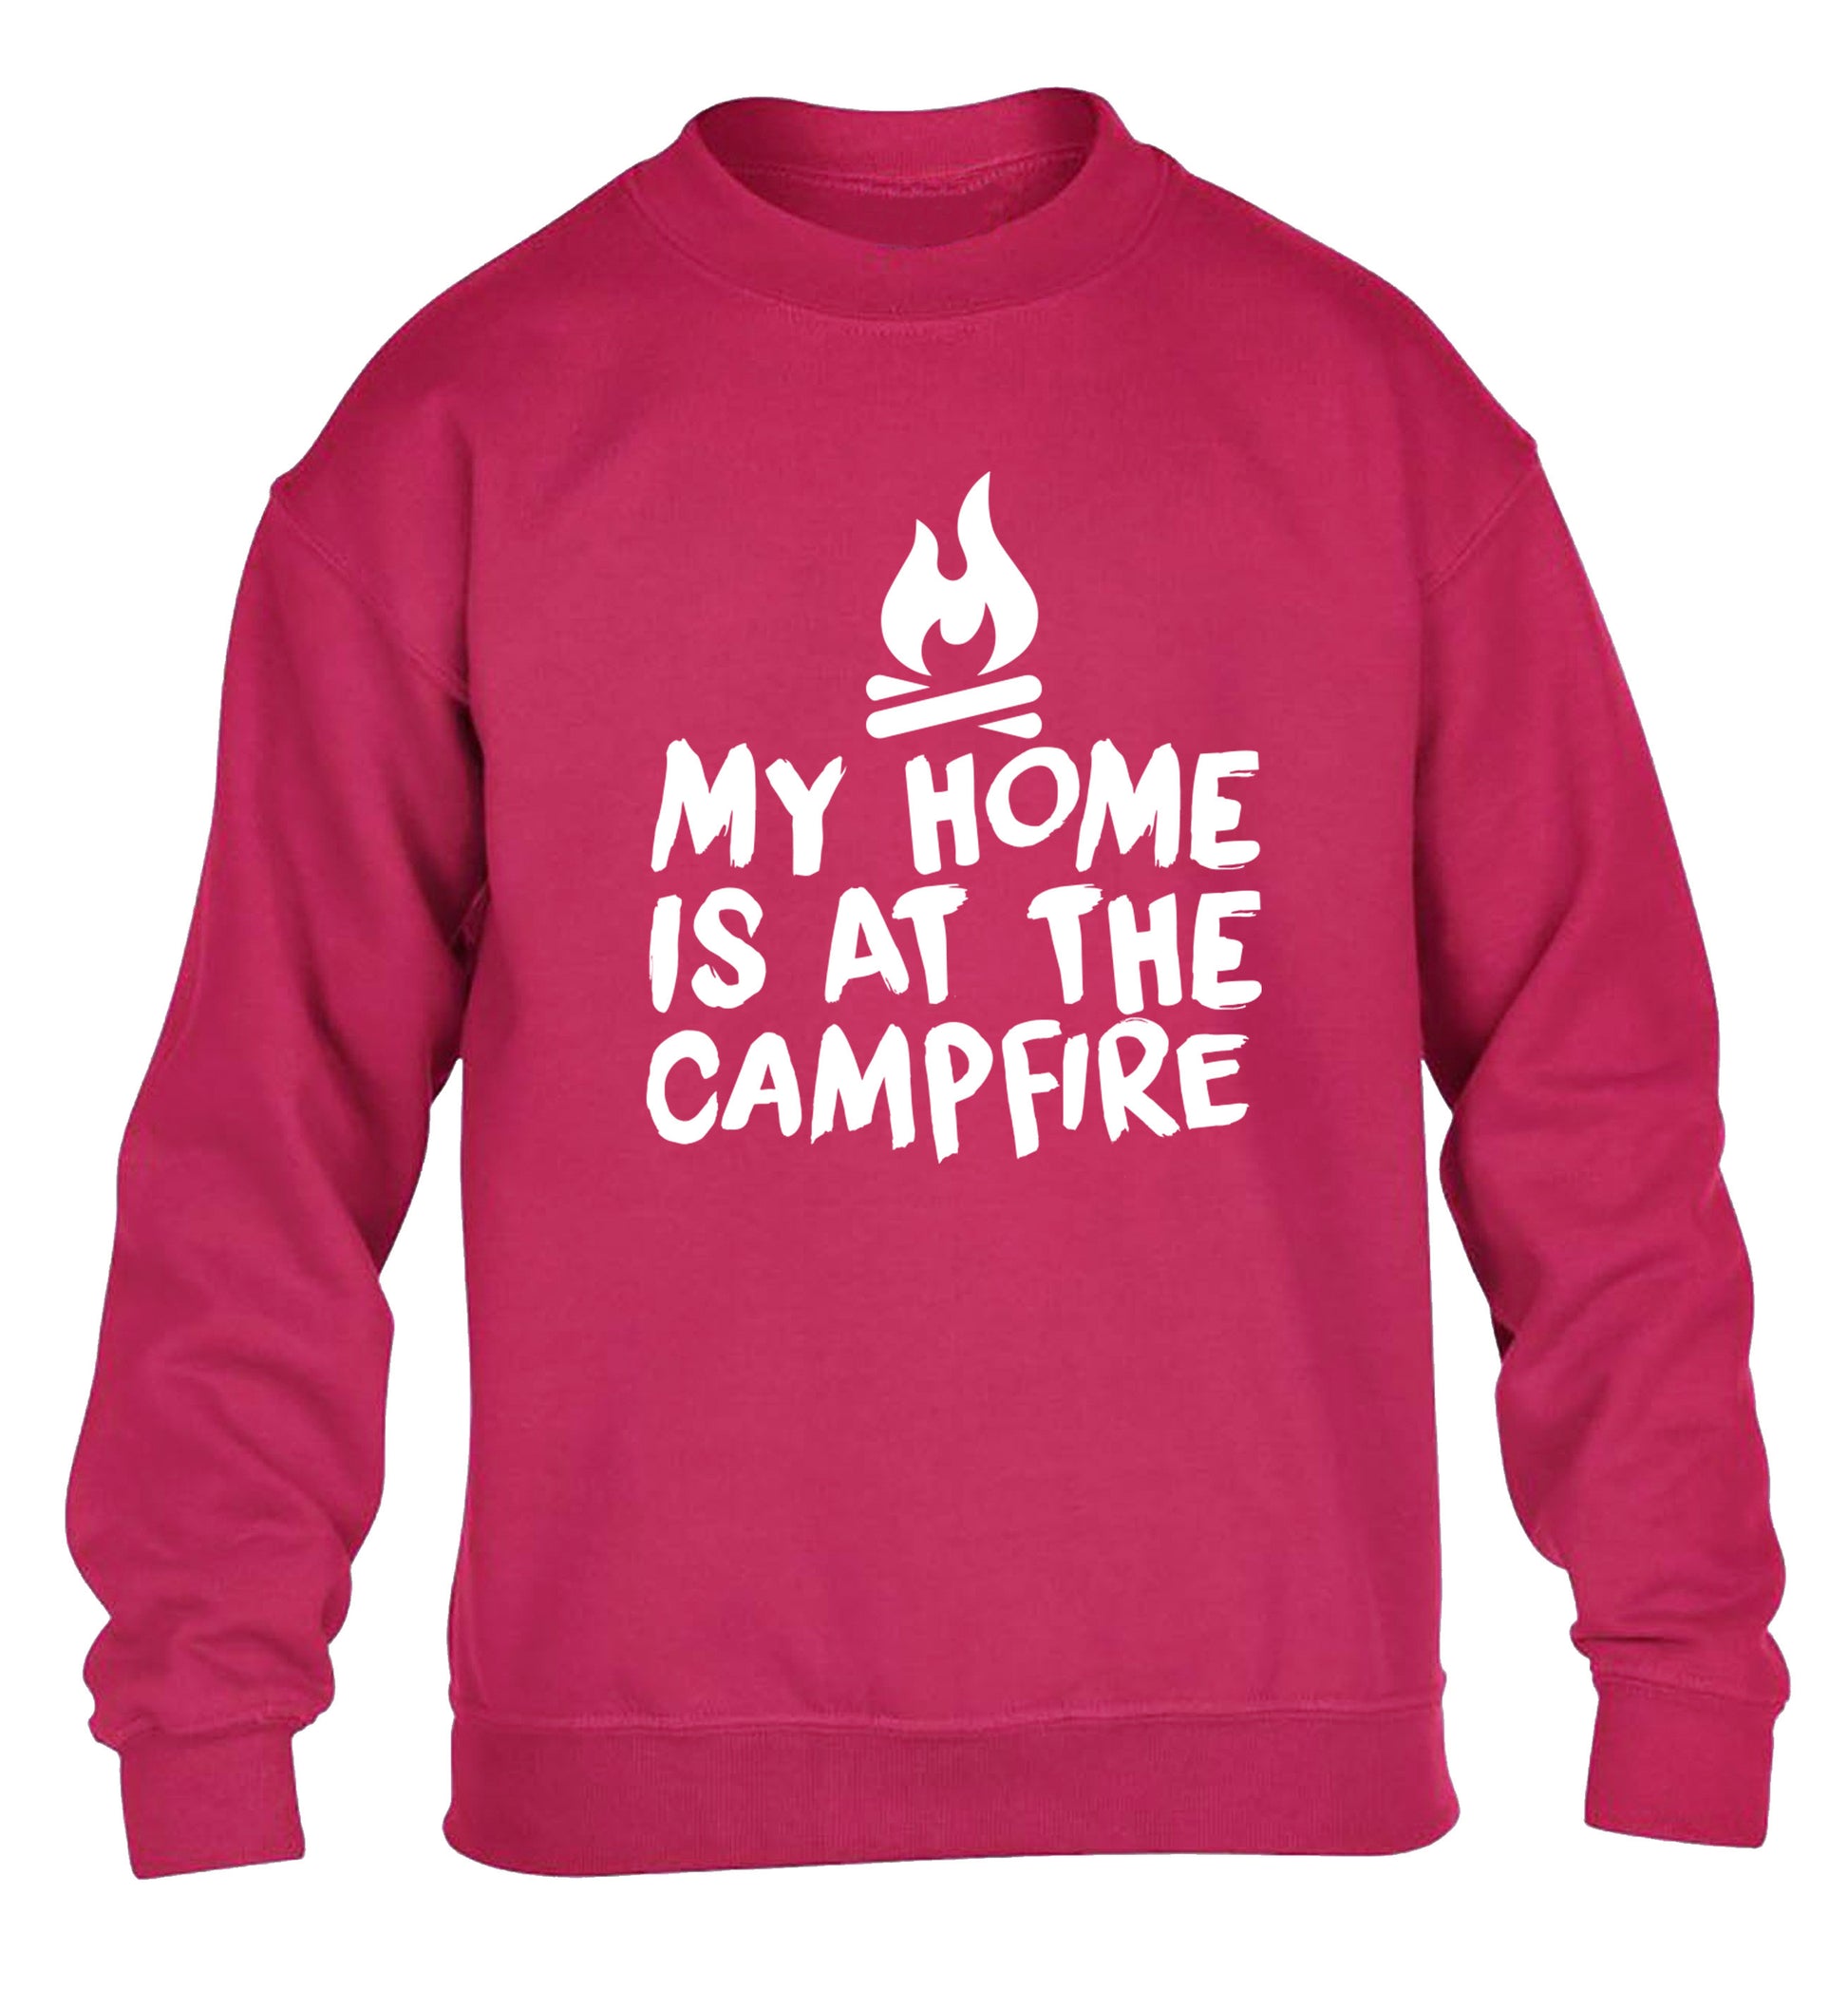 My home is at the campfire children's pink sweater 12-14 Years